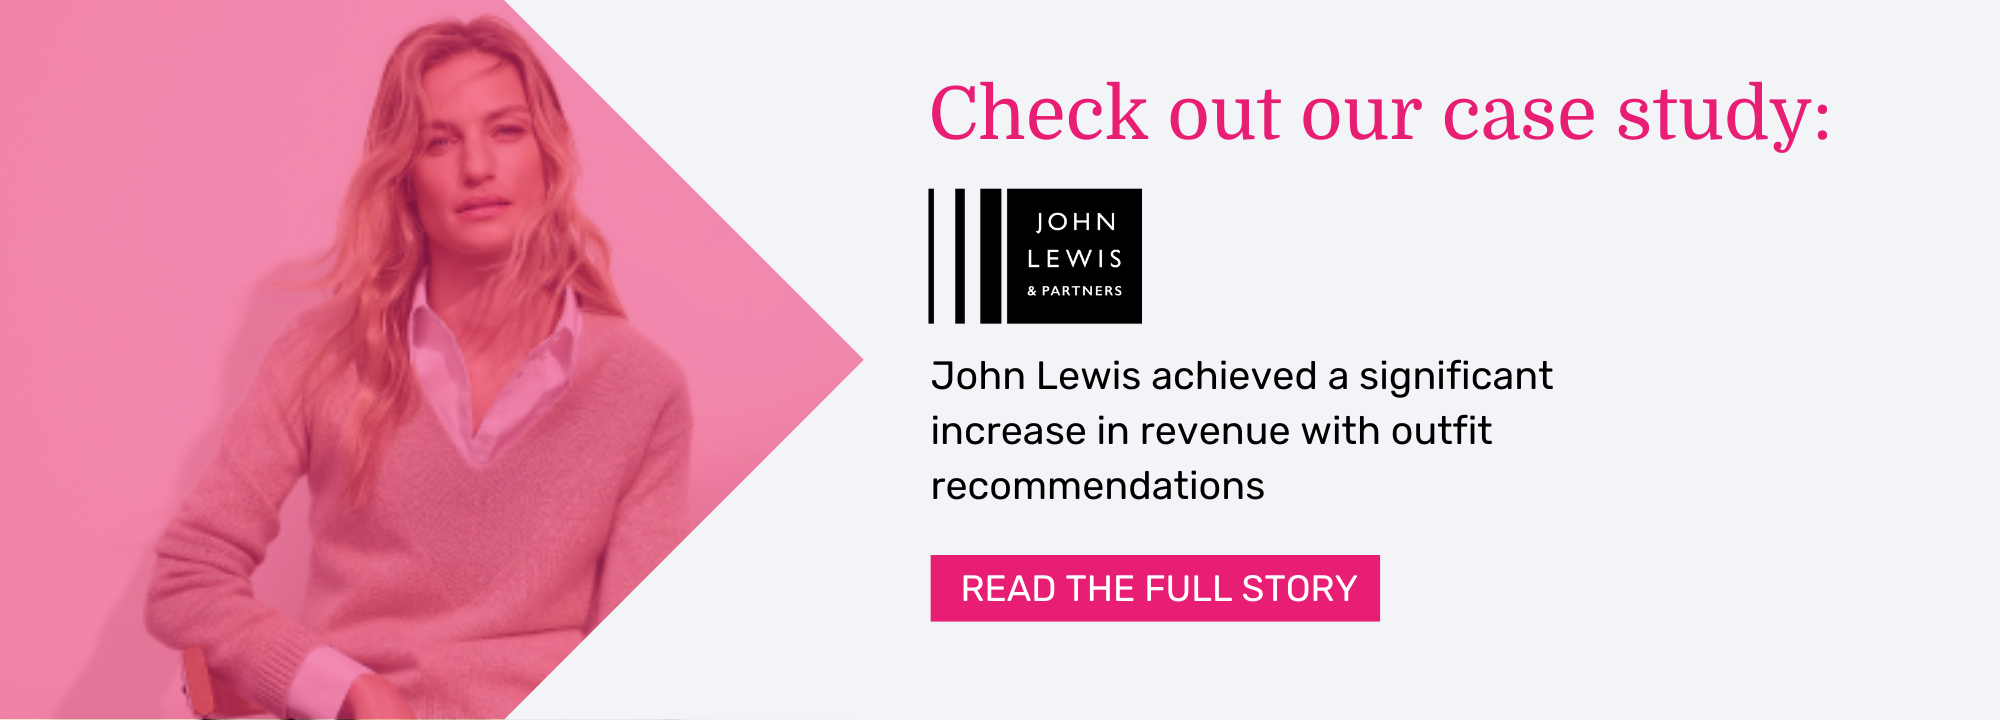 John Lewis achieved a significant increase in revenue with outfit recommendations